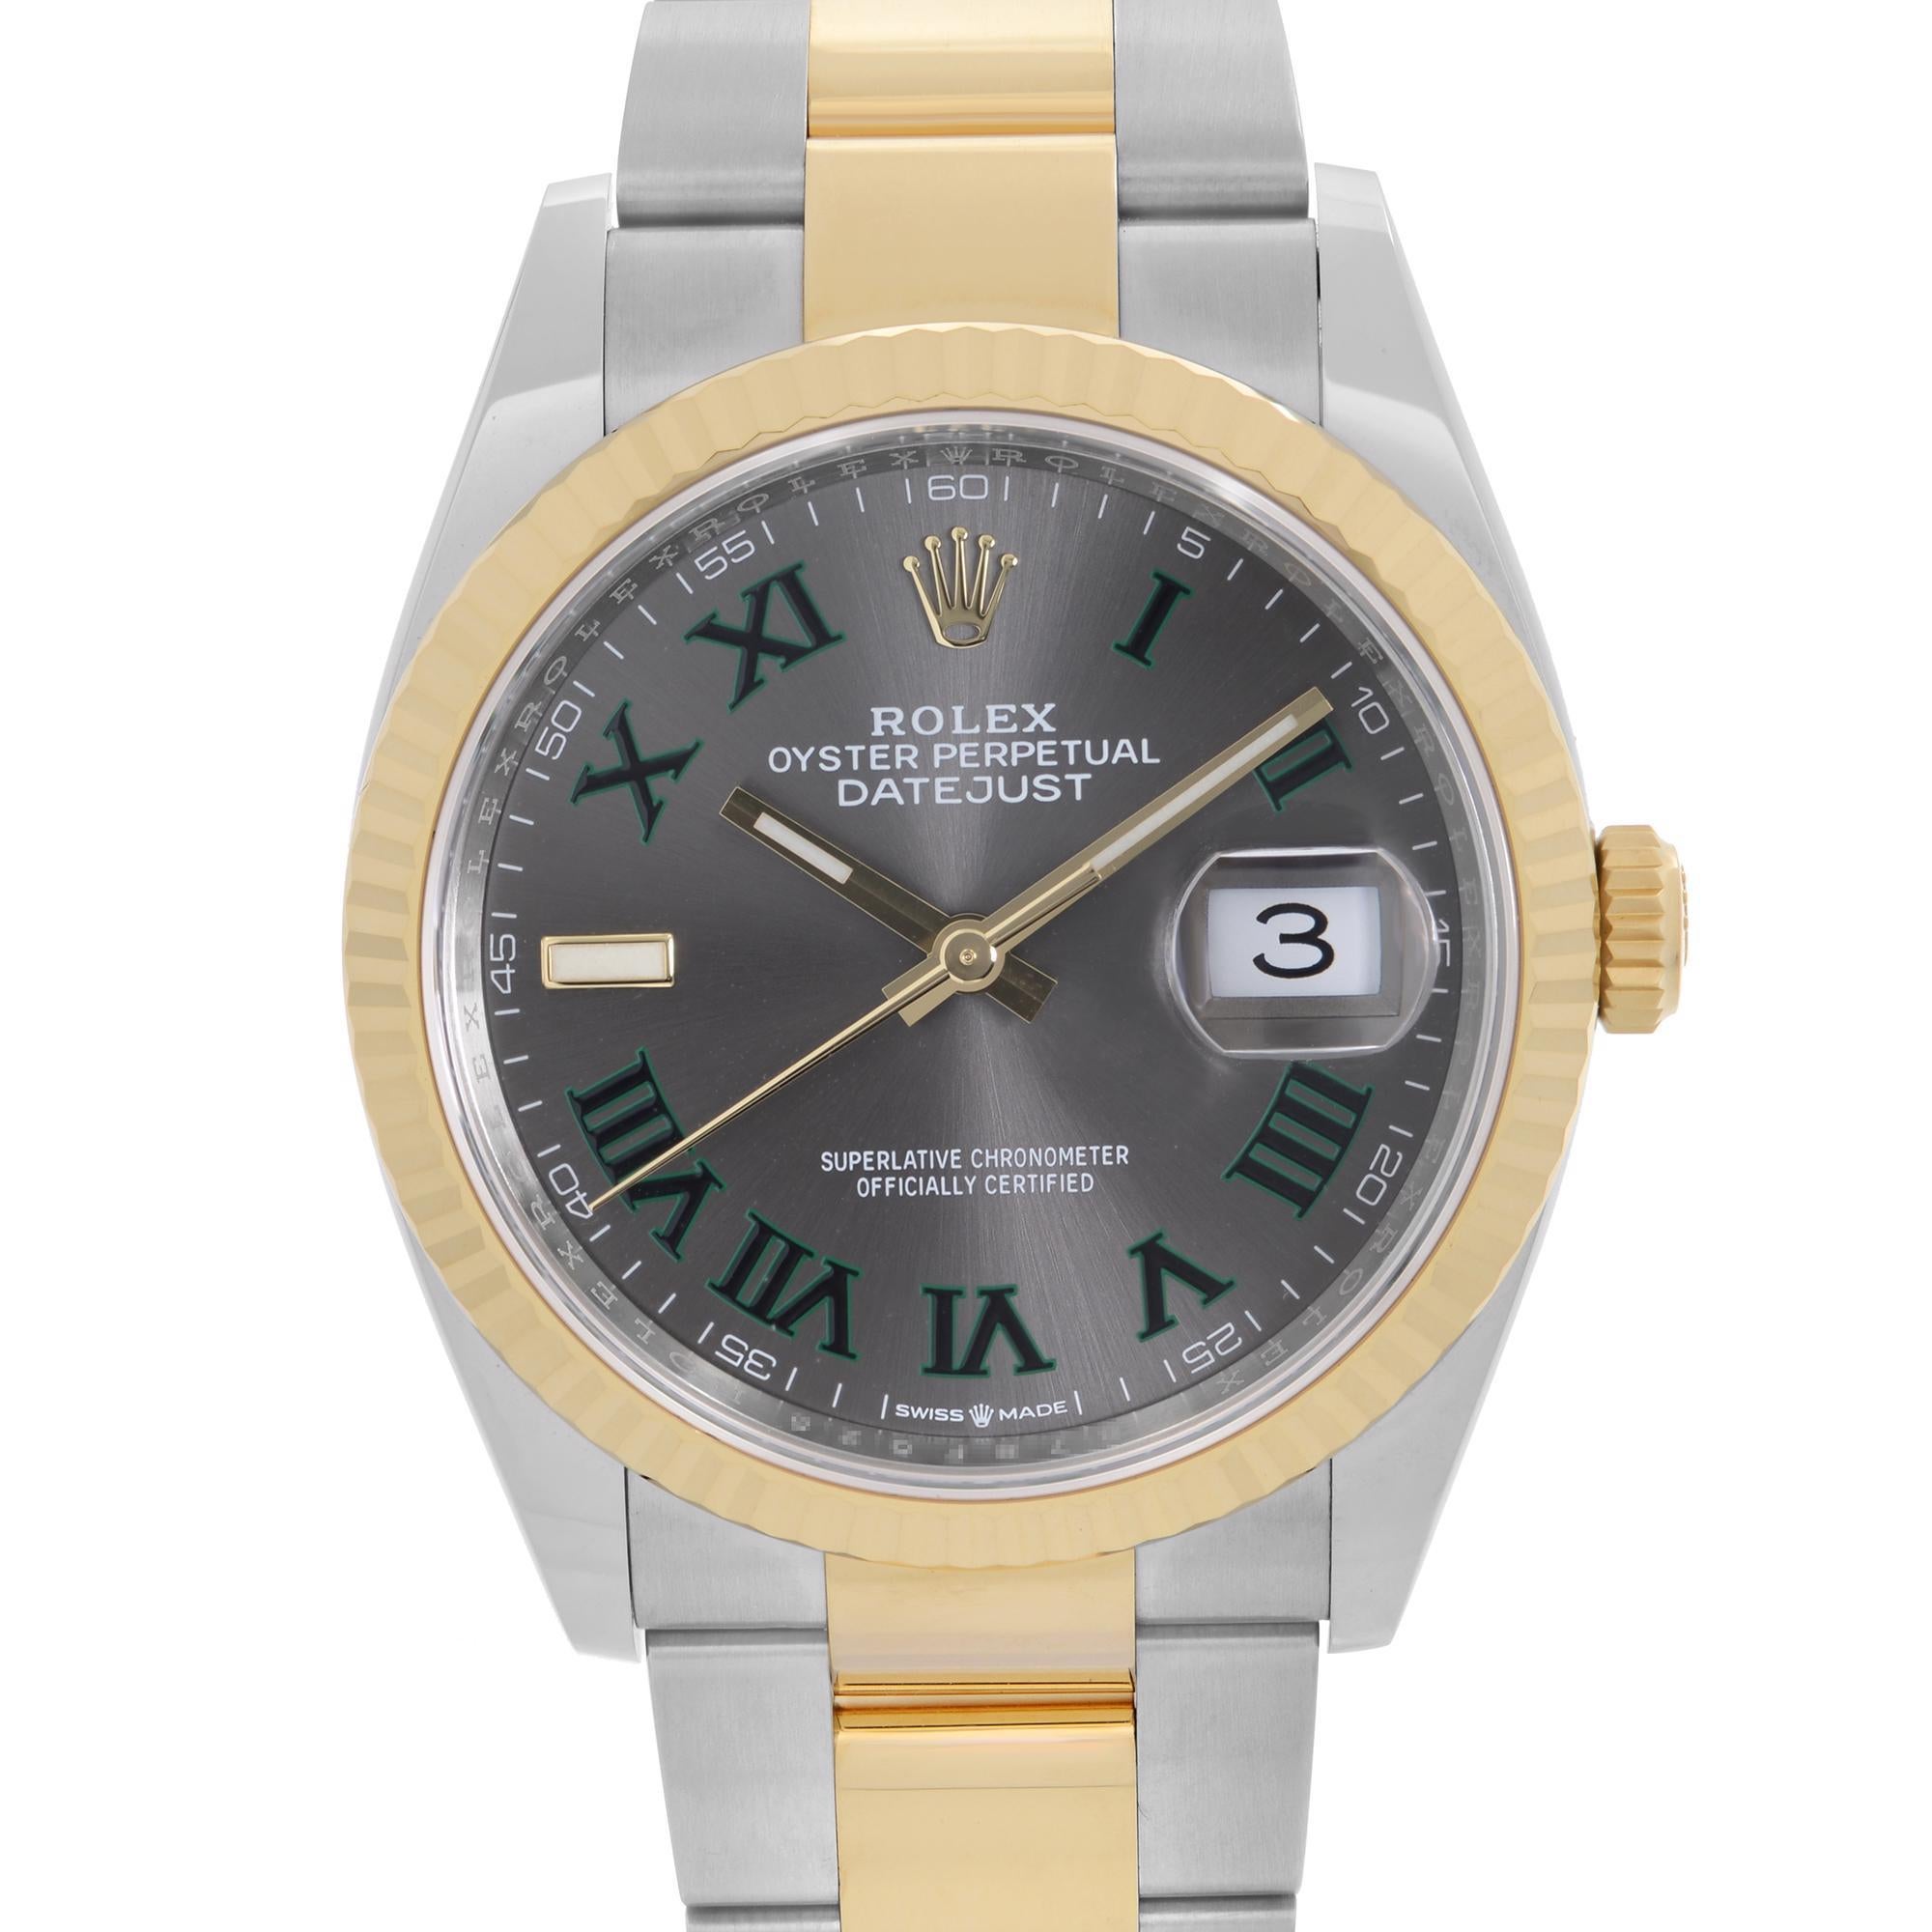 Display Model 2022 Card. Rolex Datejust 36 Steel 18k Yellow Gold Wimbledon Dial Automatic Men's Watch 126233.  This Beautiful Timepiece Come with a 2022 Card & is Powered by Mechanical (Automatic) Movement And Features: Round Stainless Steel Case